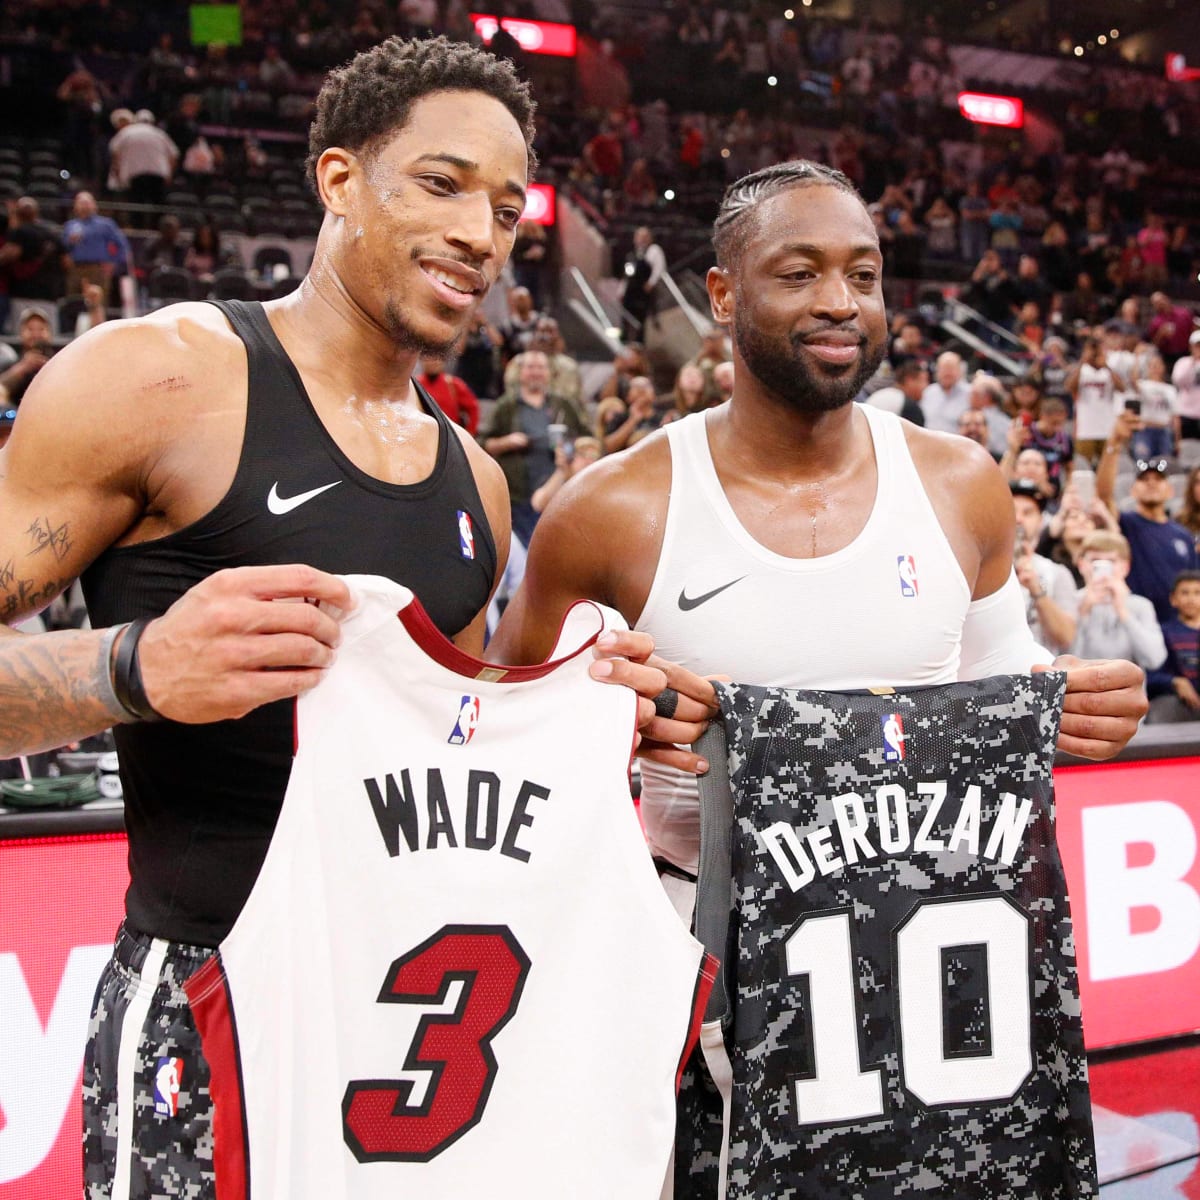 Miami Heat's Dwyane Wade reflects after last home game